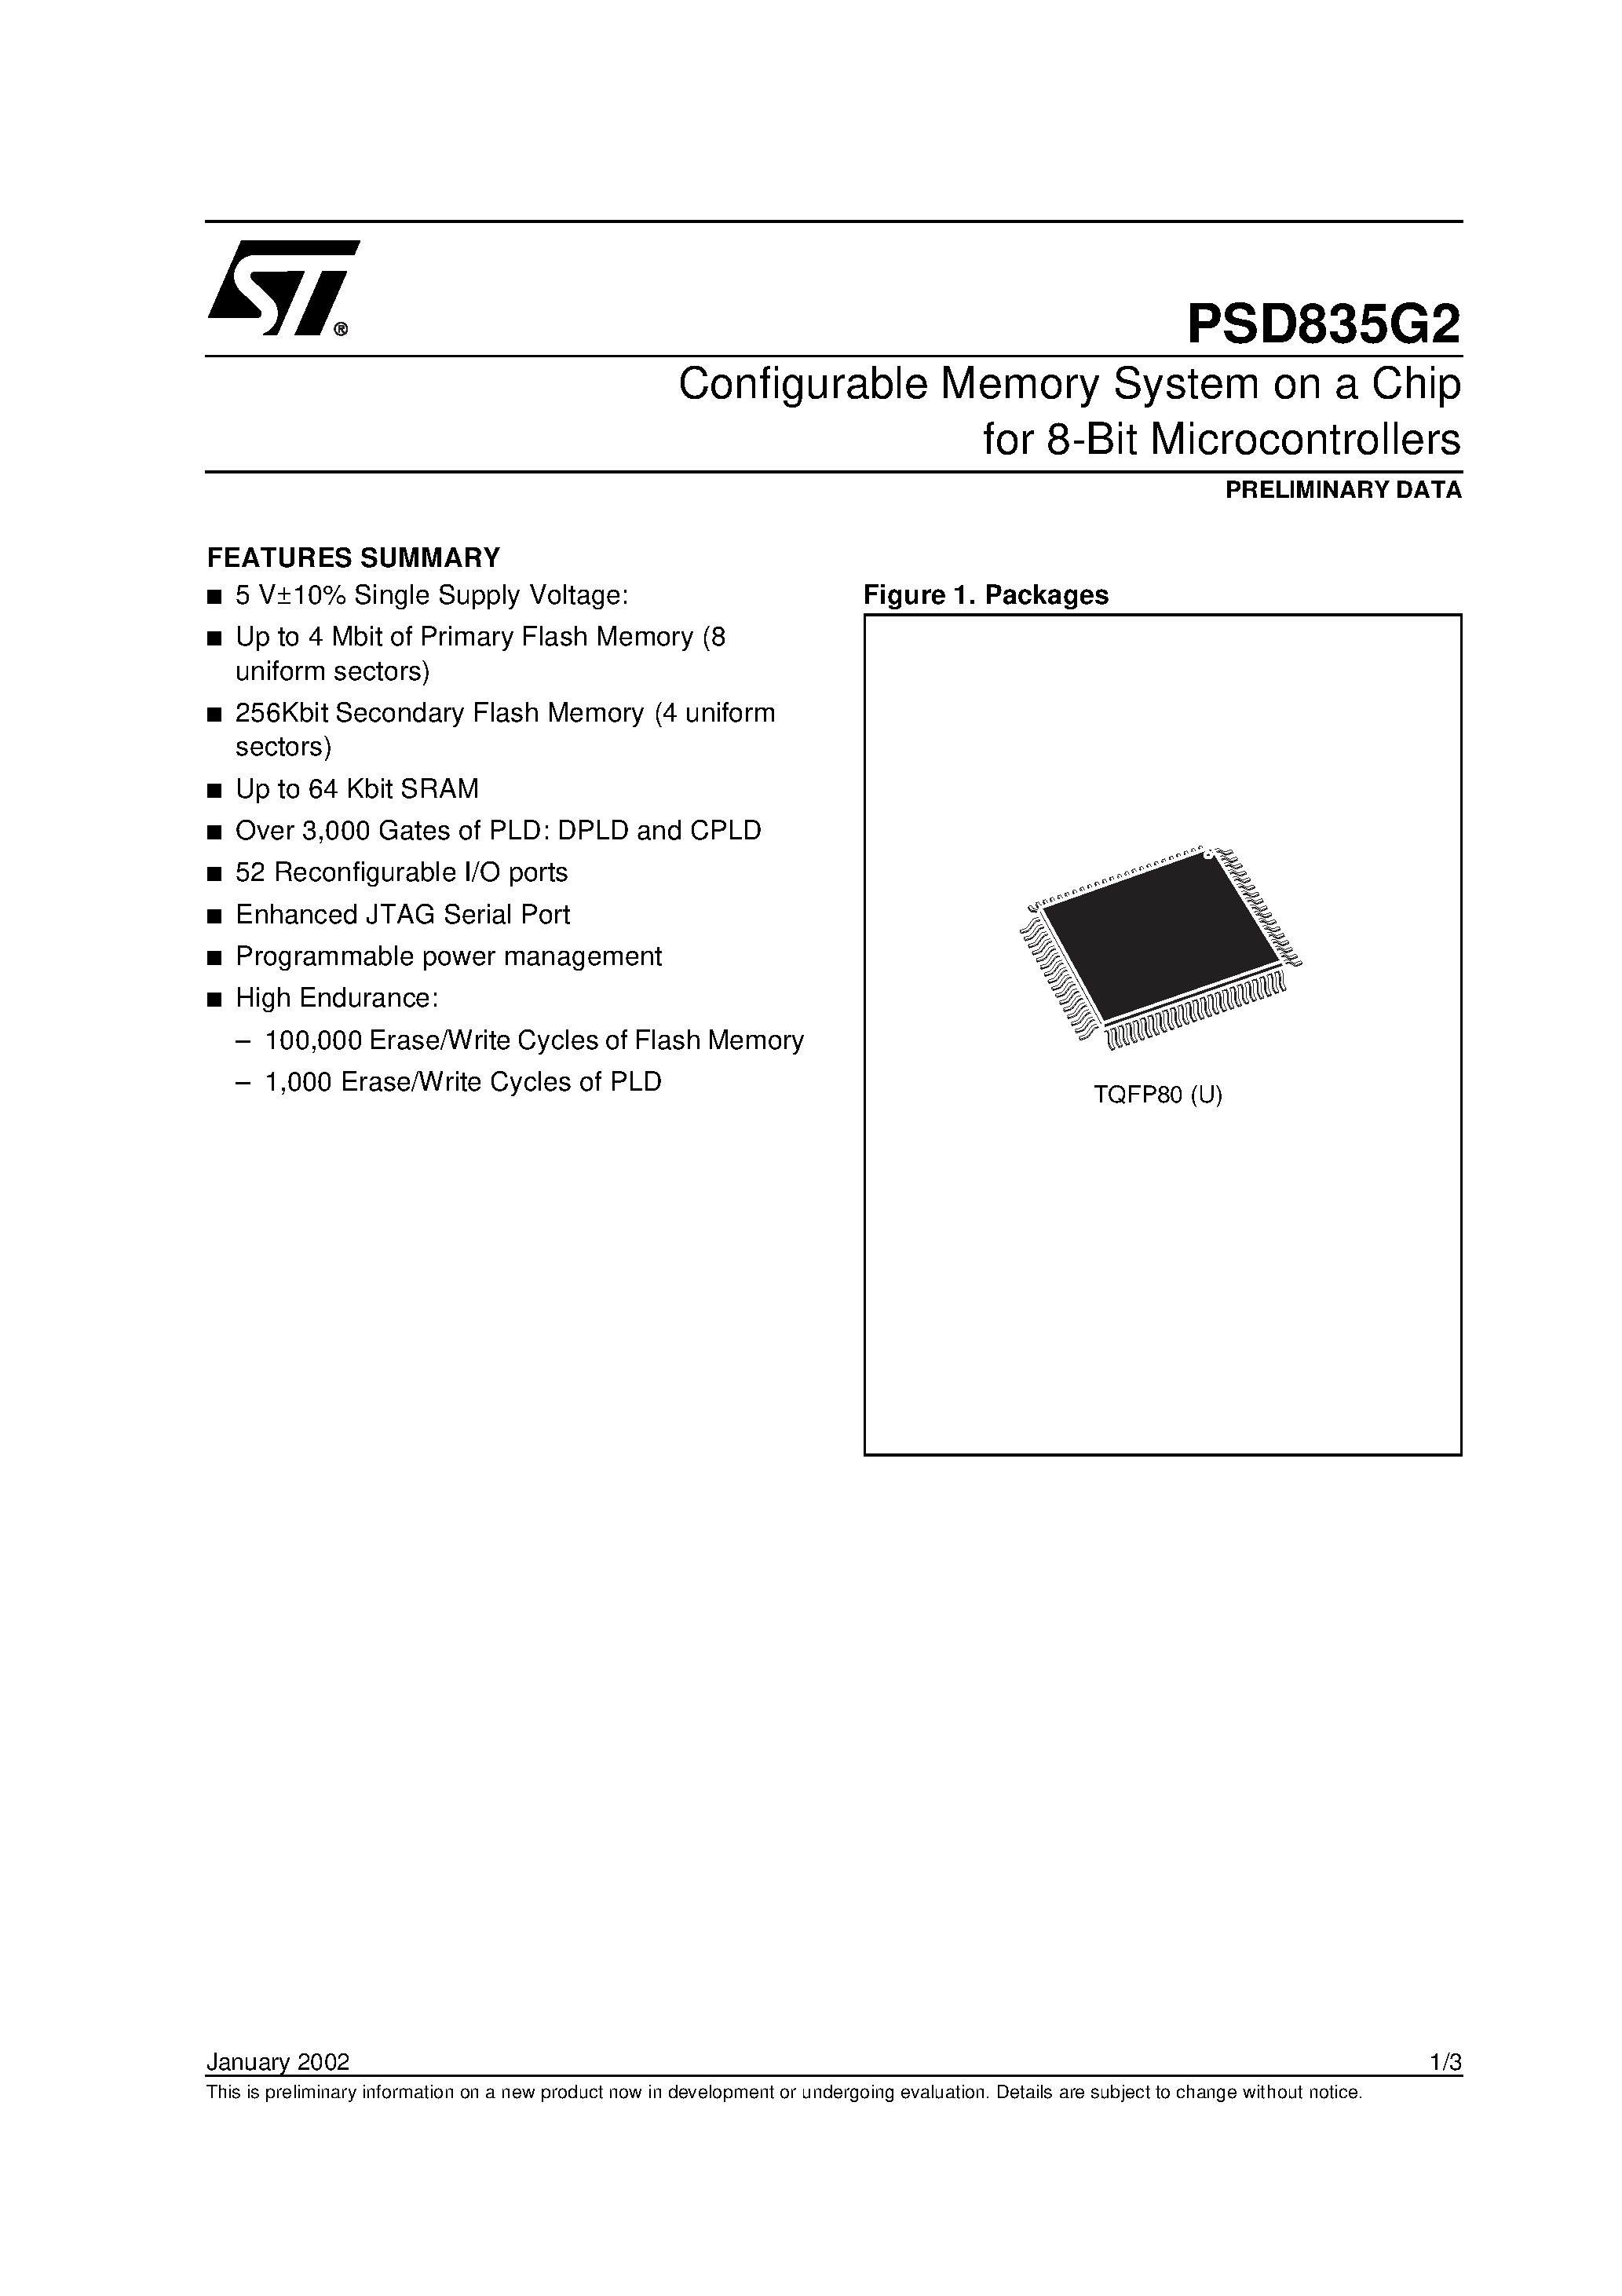 Datasheet PSD835F2-A-90J - Configurable Memory System on a Chip for 8-Bit Microcontrollers page 1